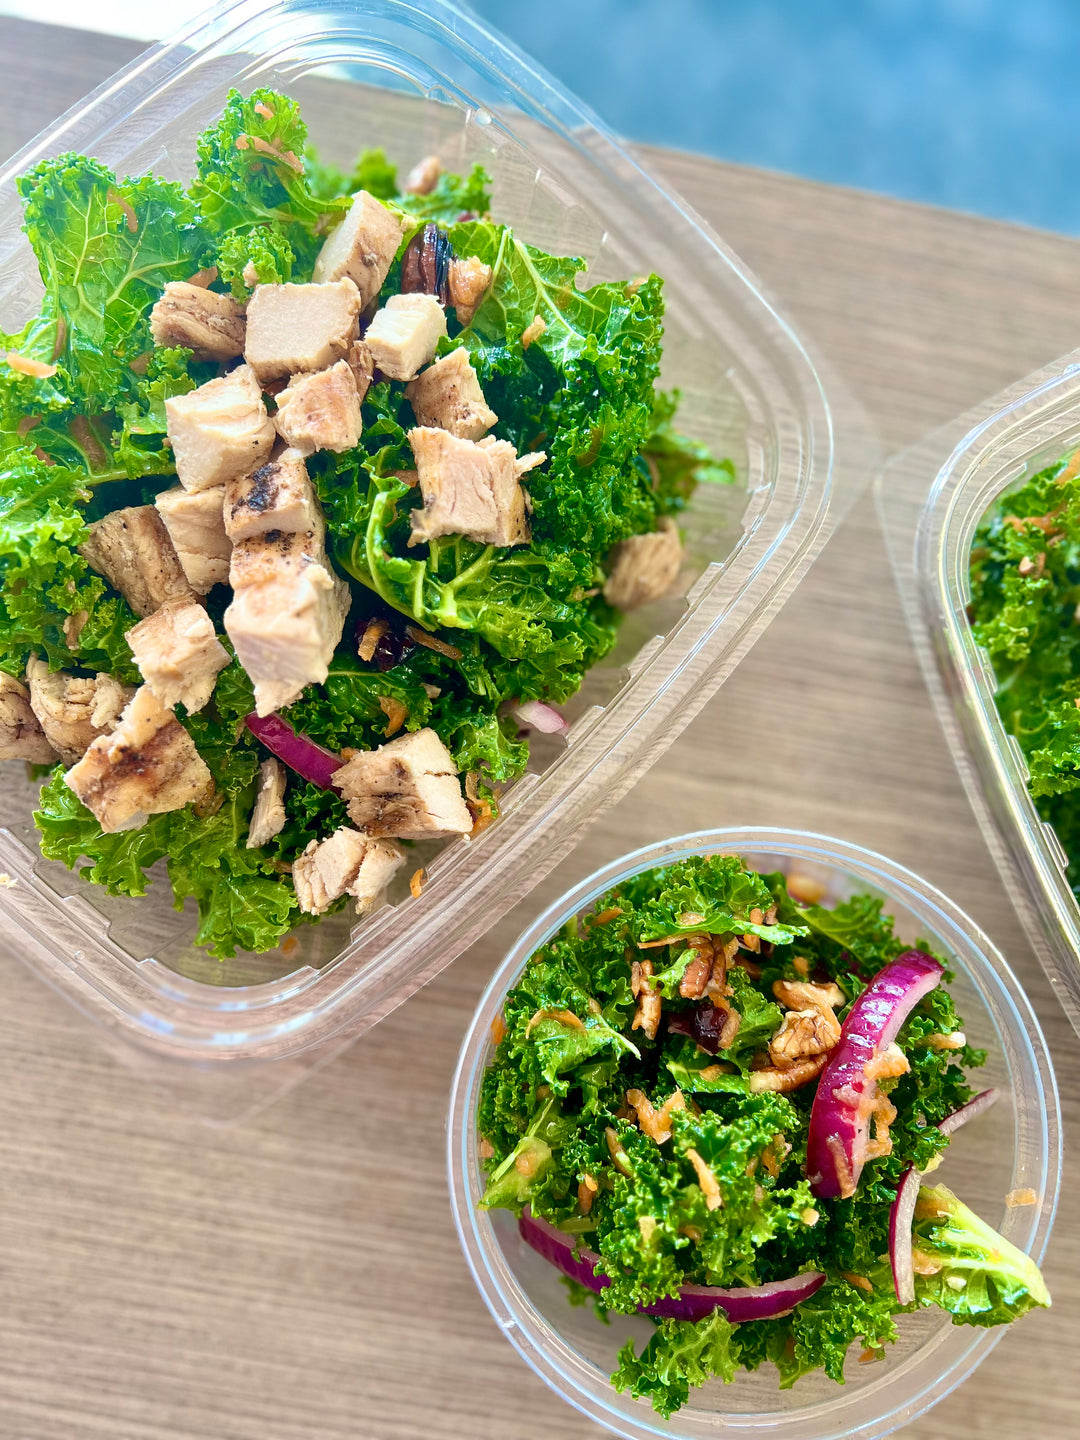 Sweet Large Kale salad with Chicken